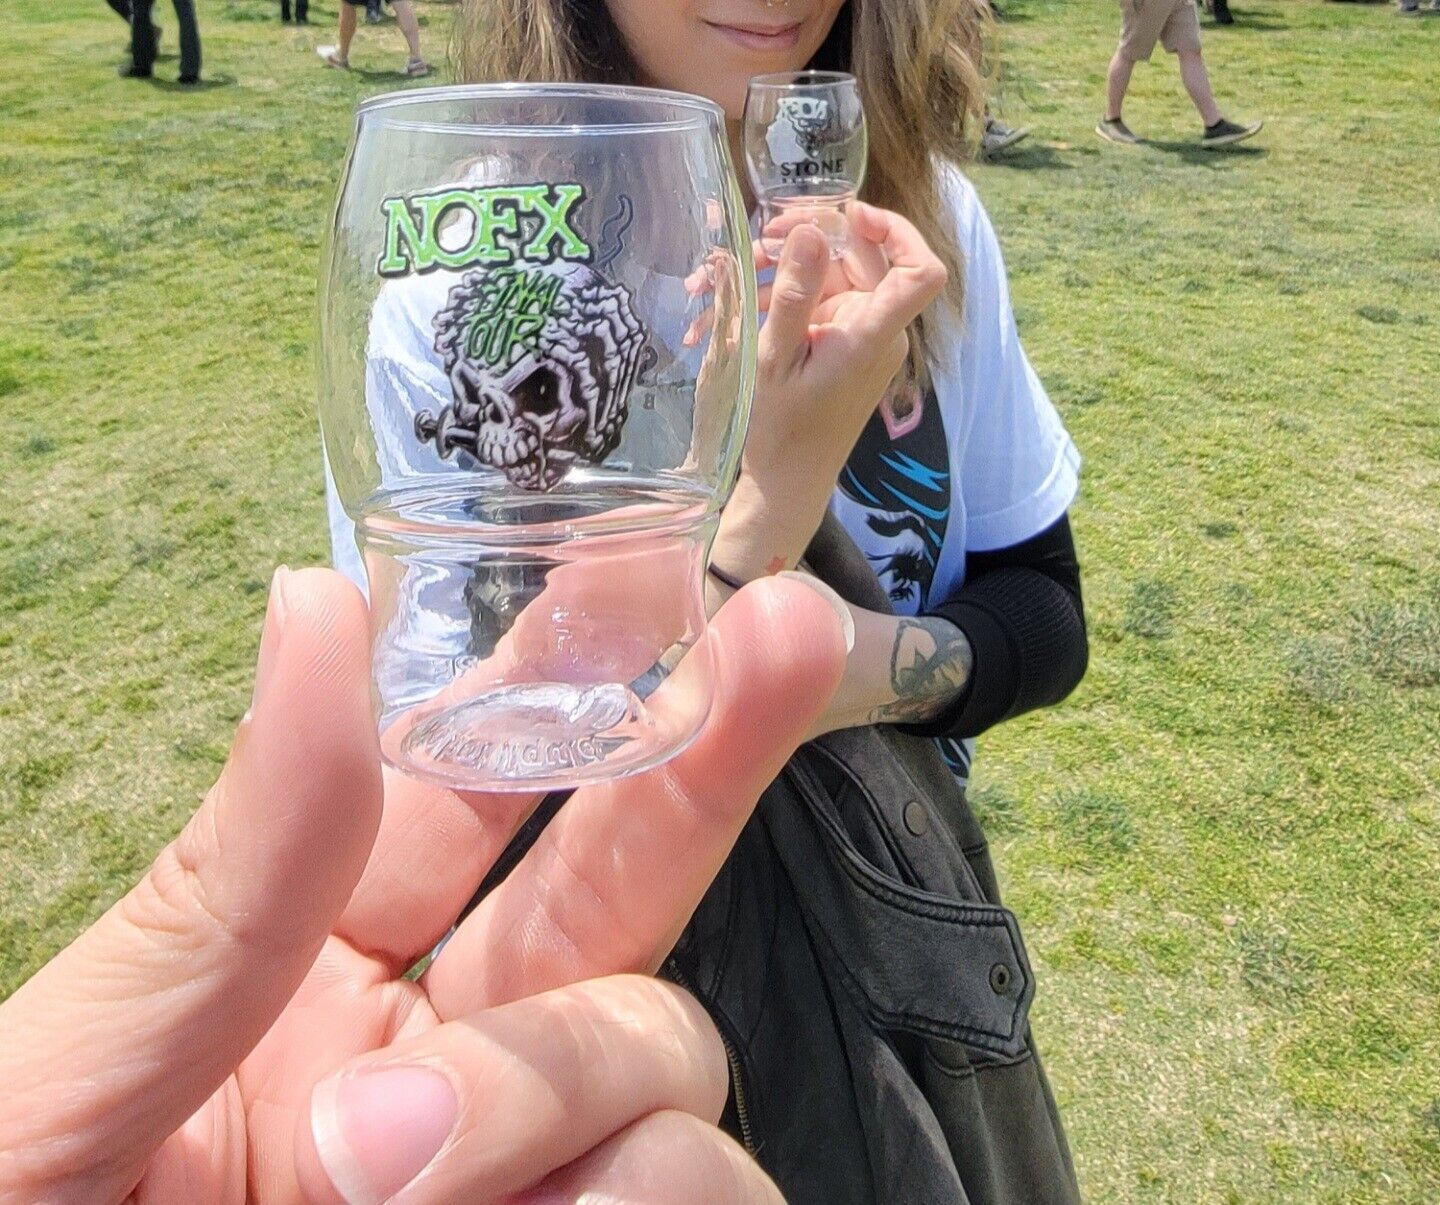 Official NOFX Final Tour Beer Tasting Cup